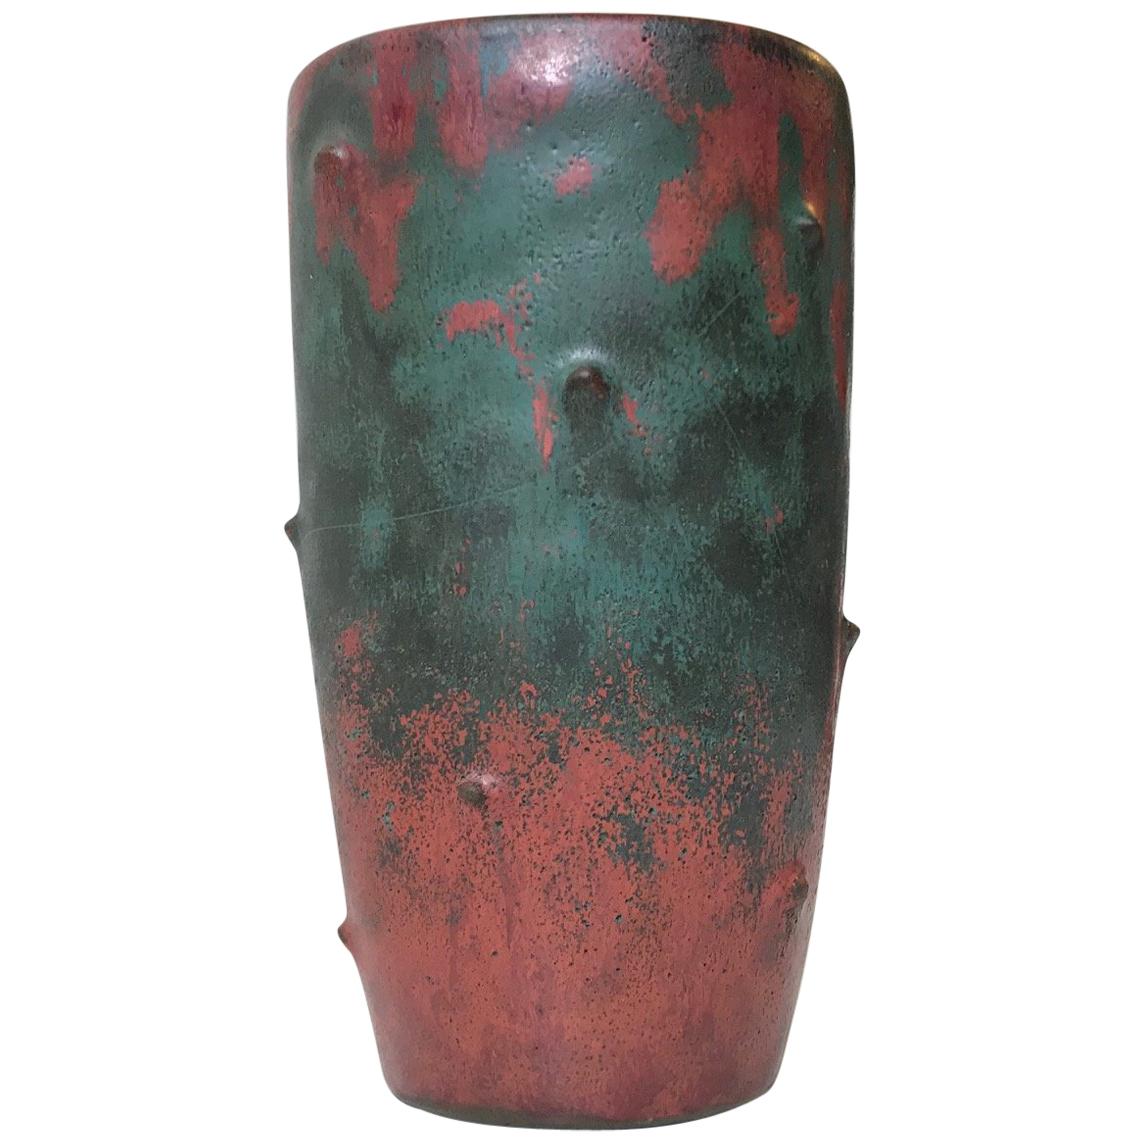 Art Deco Pottery Vase with Camou-Glaze by Niels Peter Nielsen for Dagnaes, 1940s For Sale